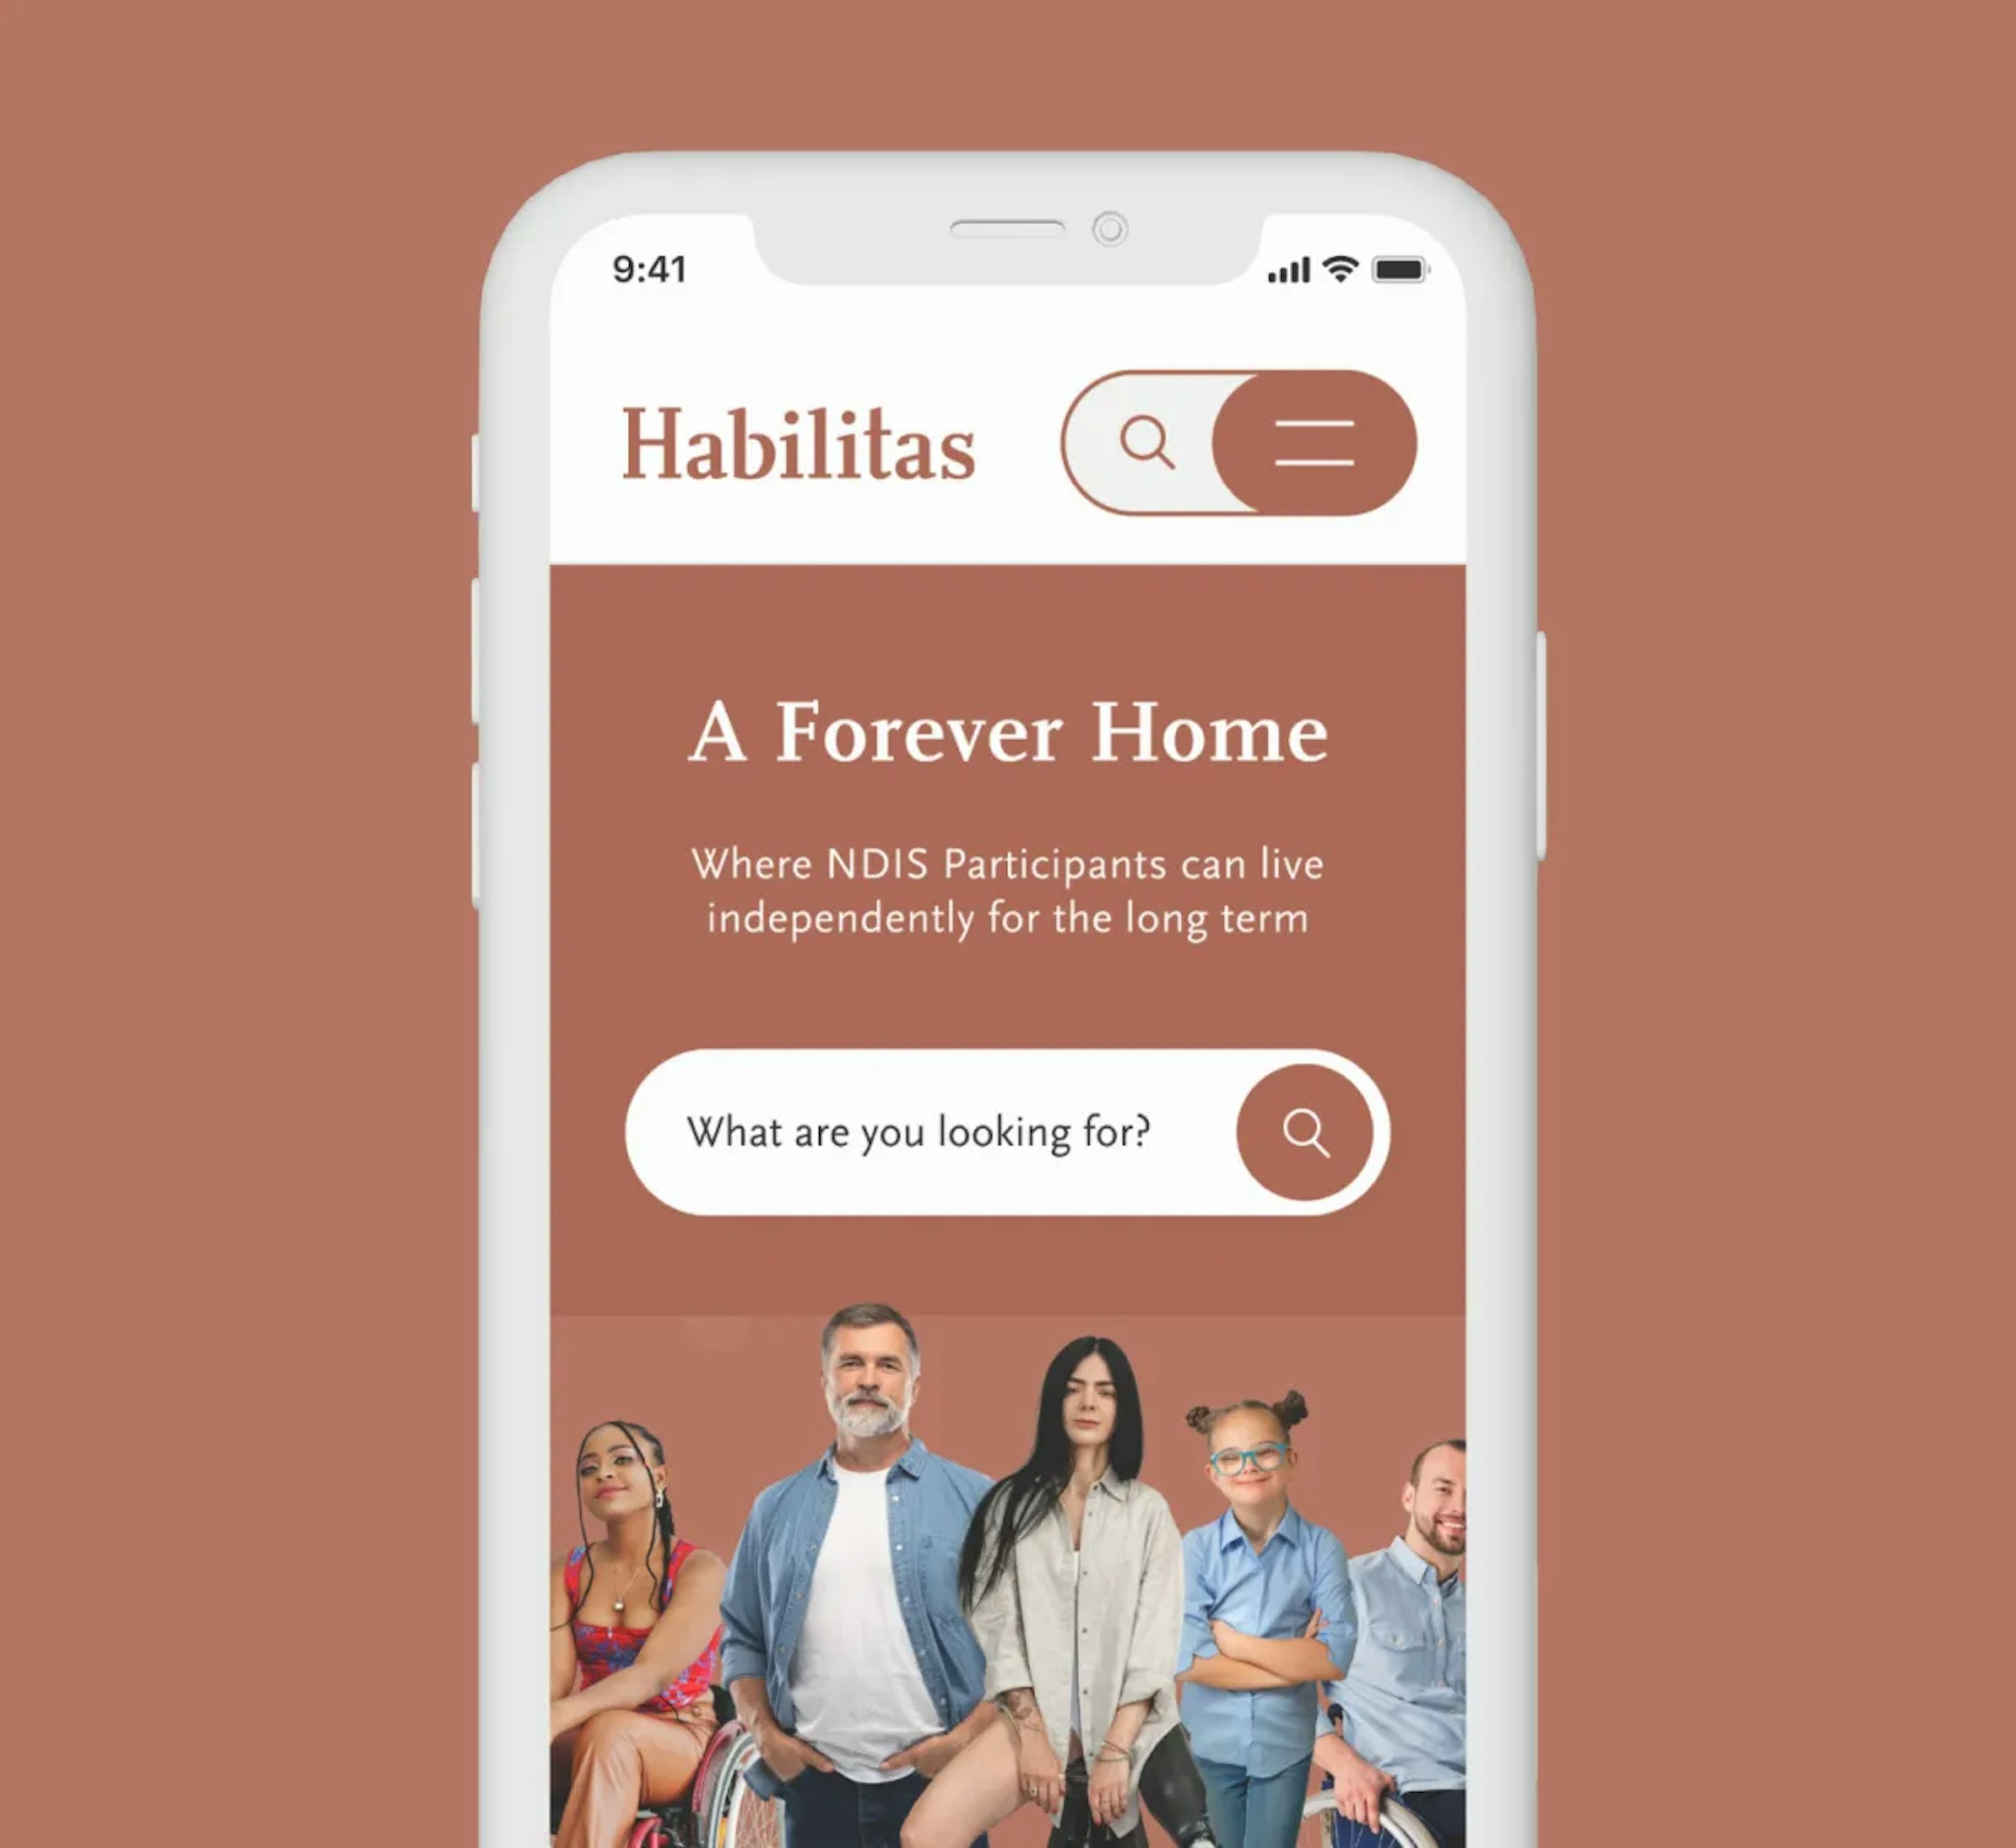 A mockup of the Habilitas website on mobile.